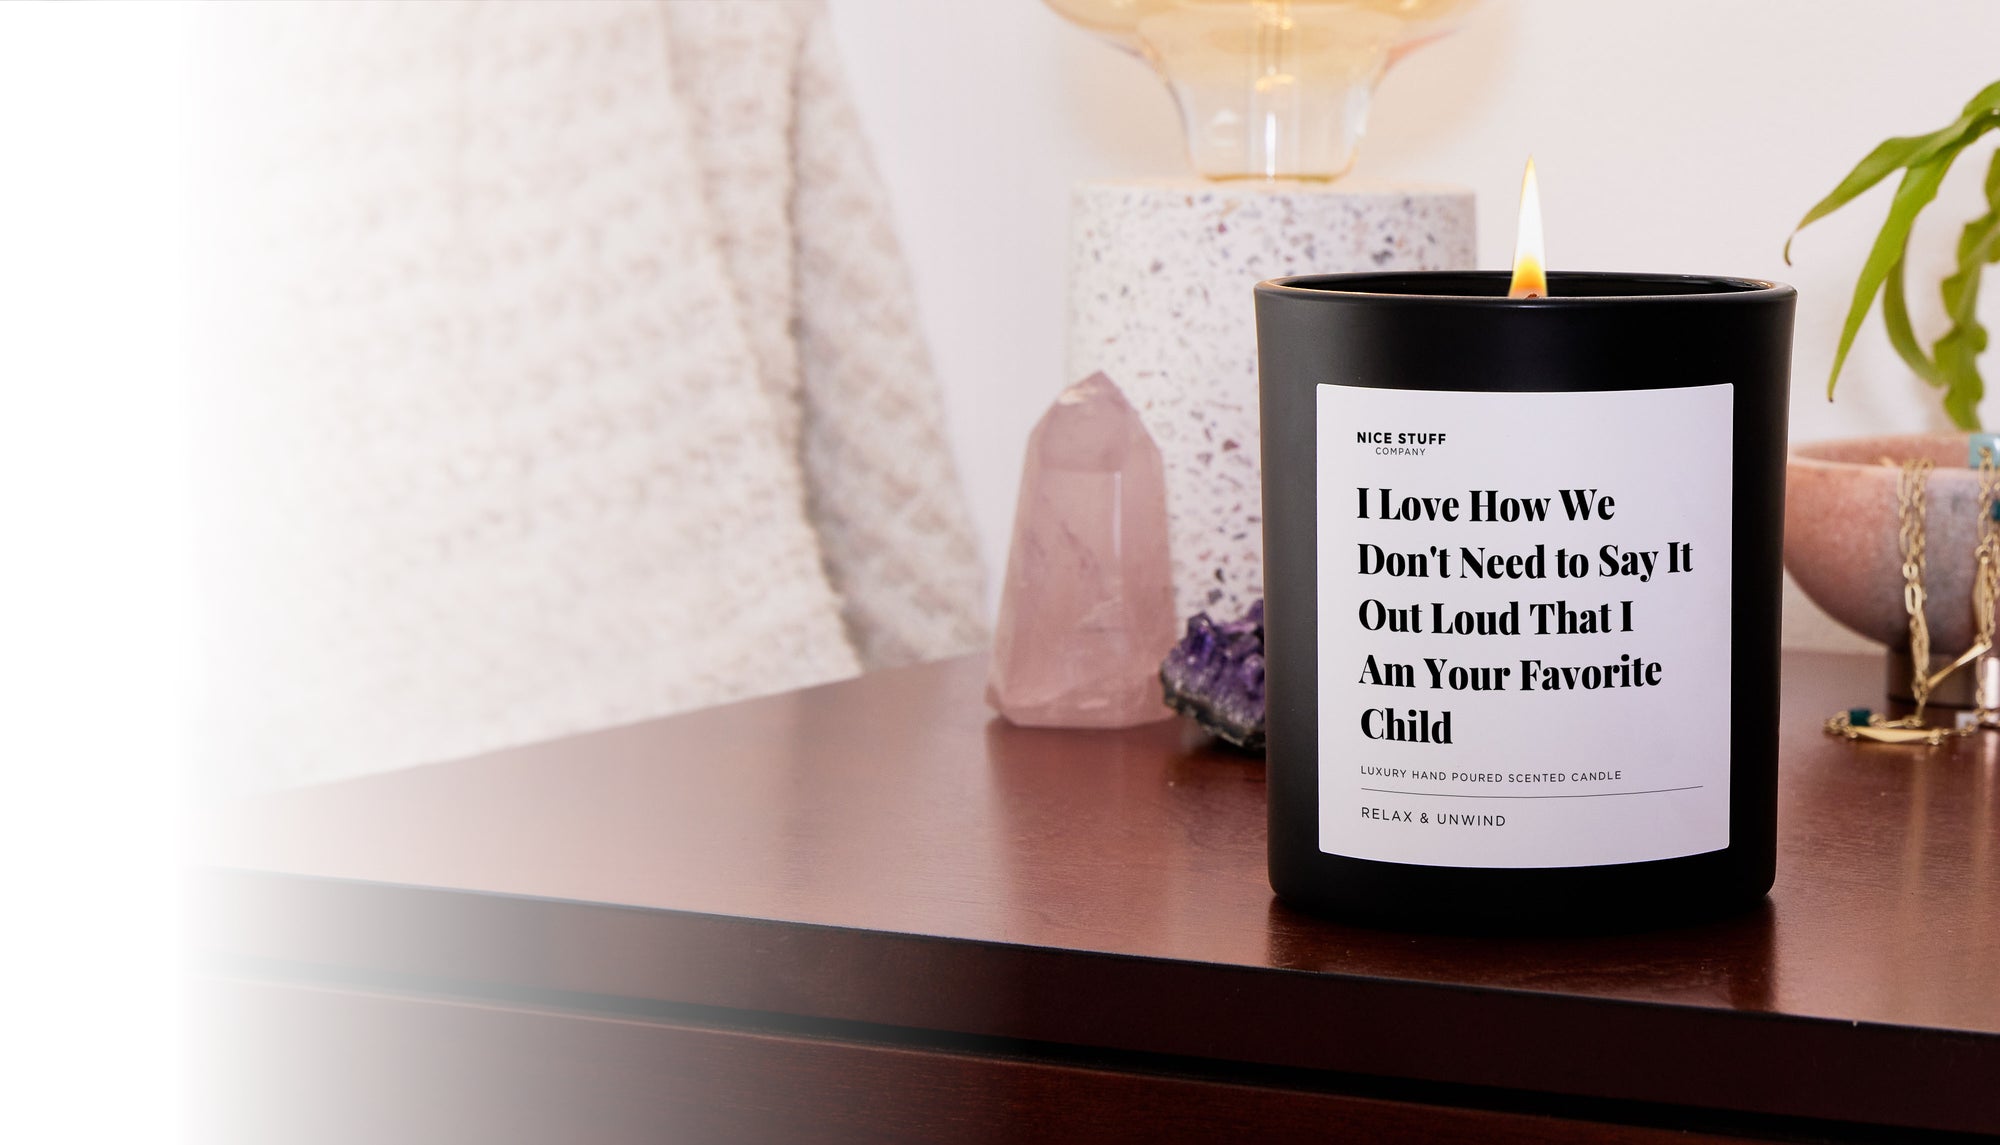 Sarcastic & Funny - Luxury Candle Jar - Relax & Unwind – Nice Stuff For Mom